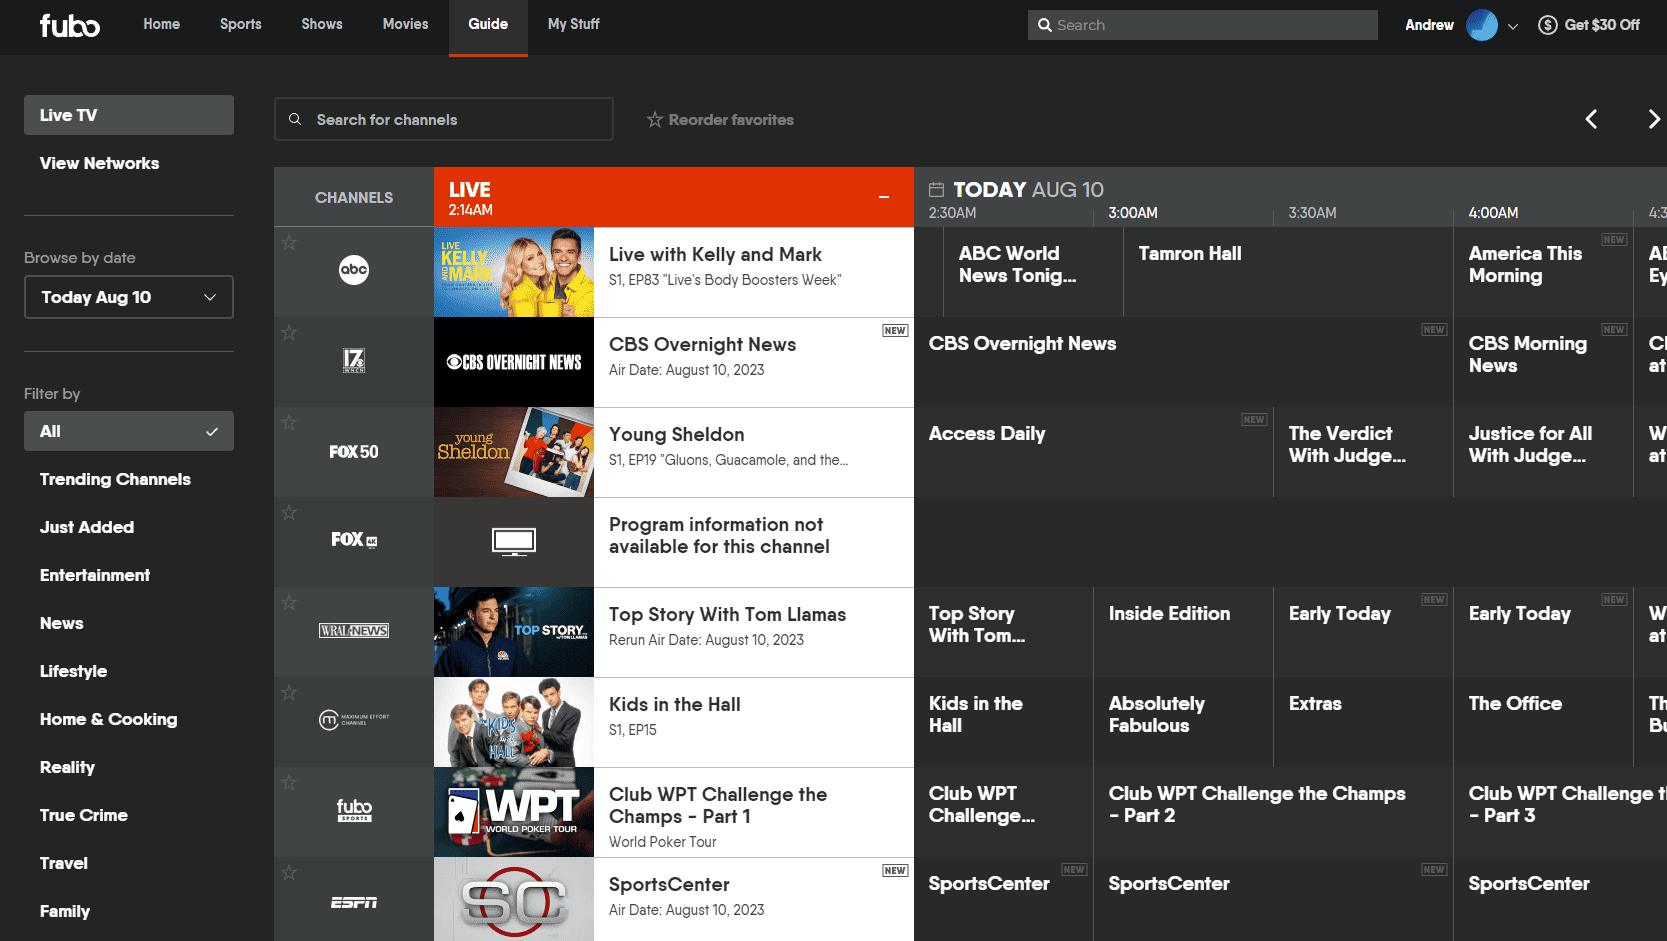 A screenshot of the Live TV channel guide on fuboTV